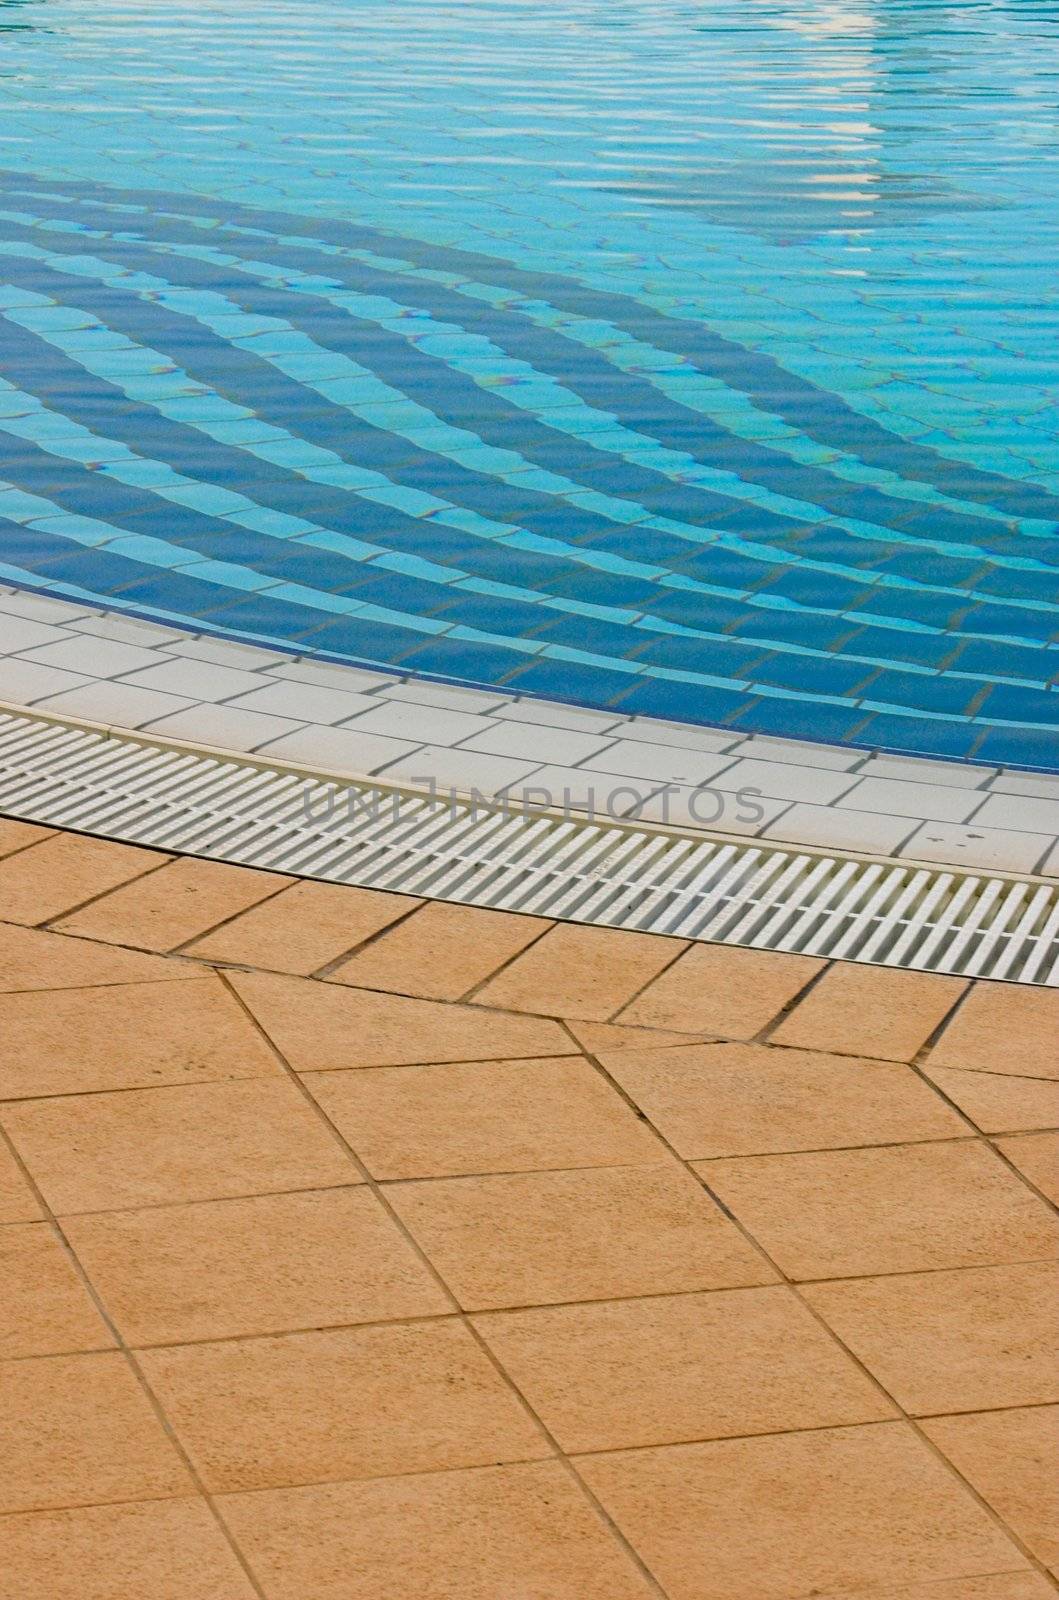 Detail of a white tiled swimming pool